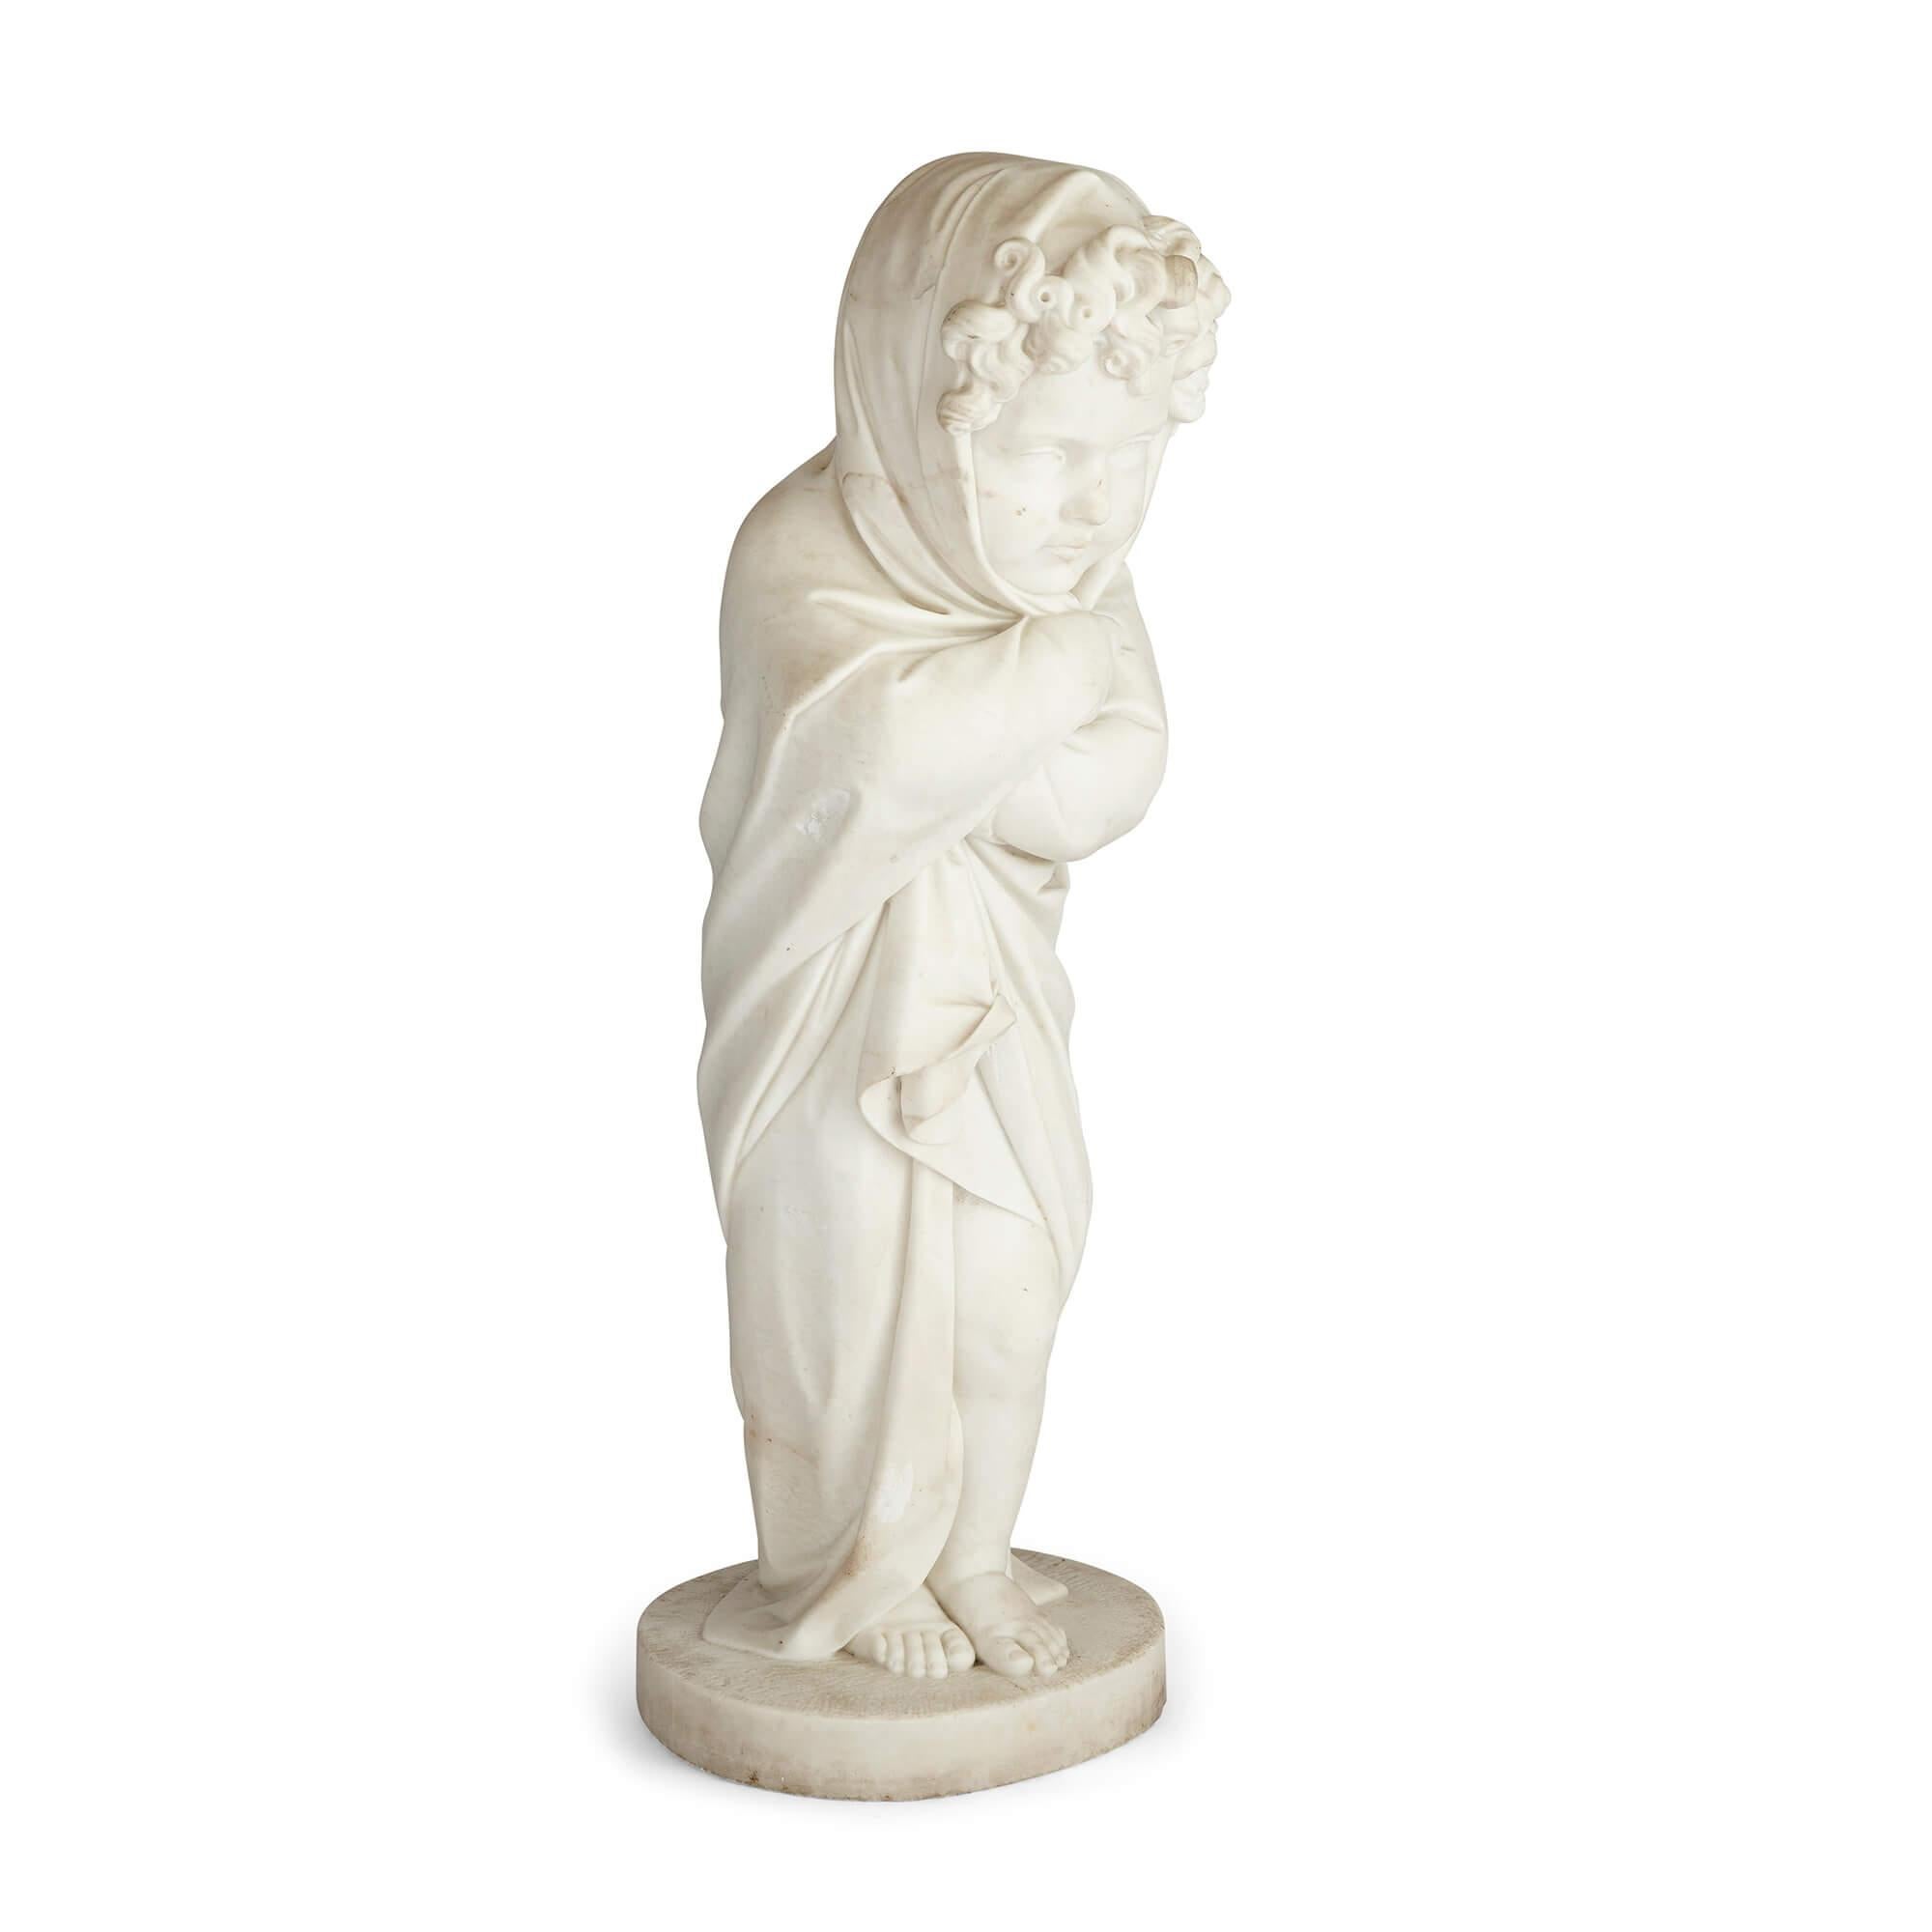 Pair of large Italian carrara marble putti sculptures by Stampanoni
Italian, late 19th century
Boy: height 89cm, width 31cm, depth 25cm
Girl: height 83cm, width 31cm, depth 33cm

This pair of fine carrara marble sculptures depict a pair of